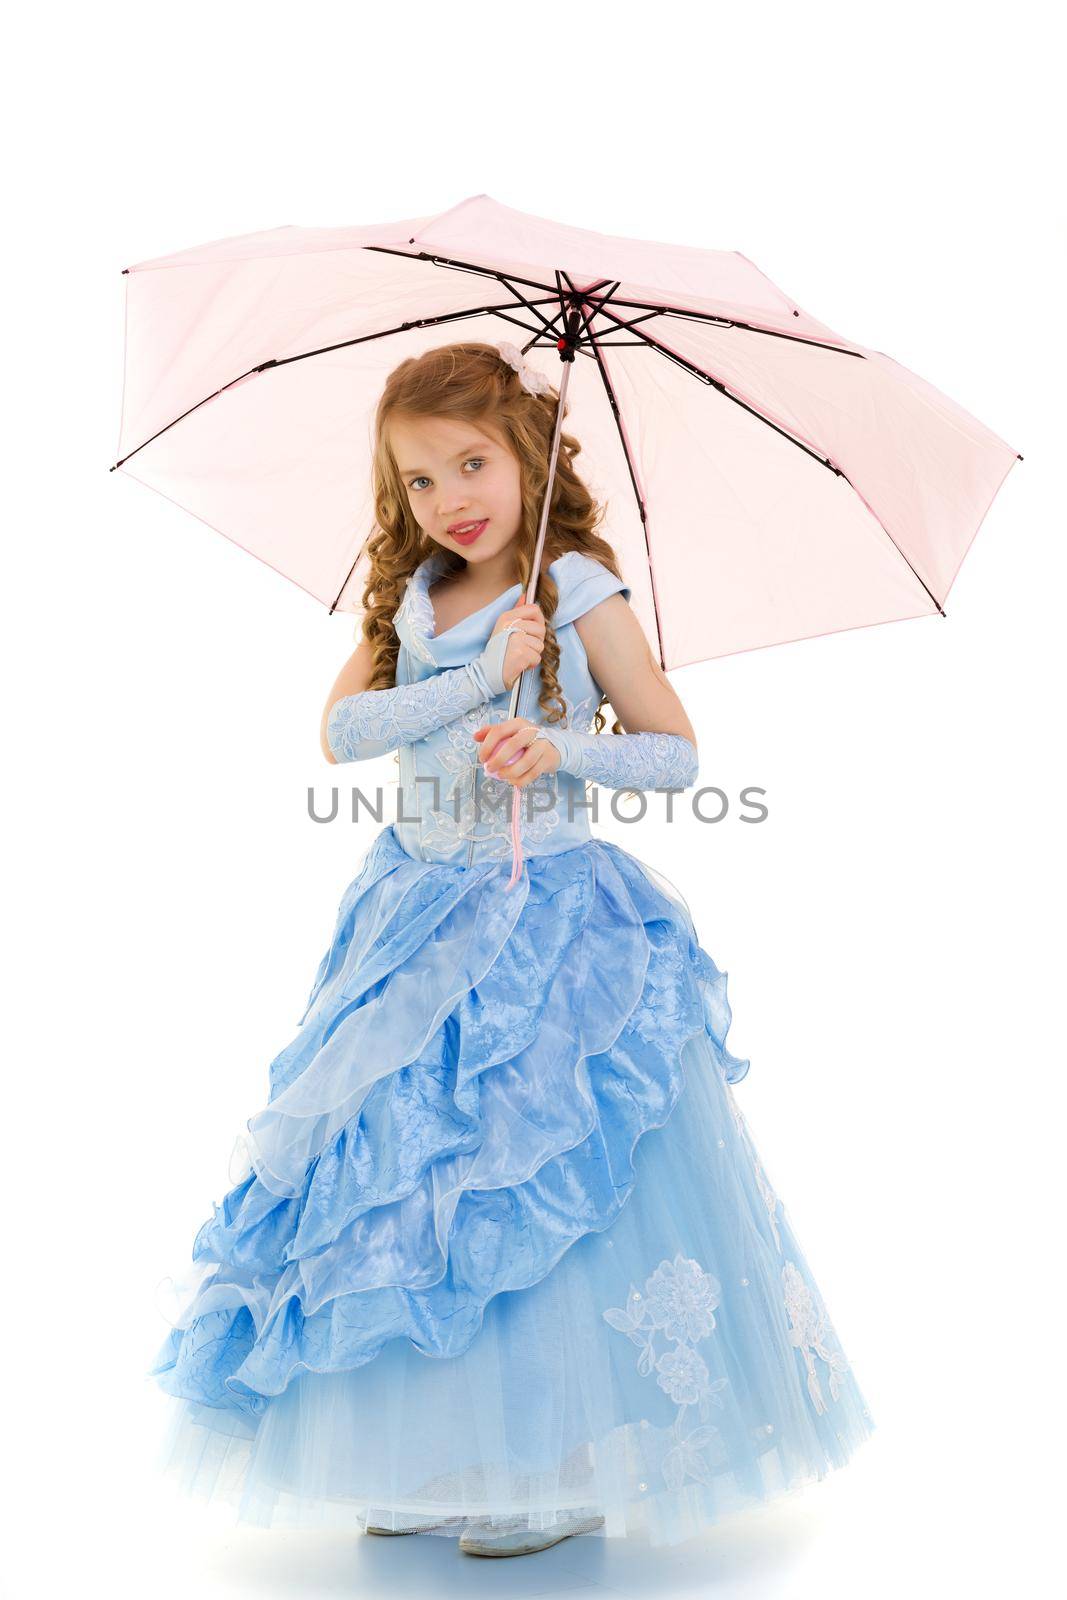 Beautiful little girl princess, in a long dressy dress under an umbrella. Concerts style and fashion. Isolated on white background.